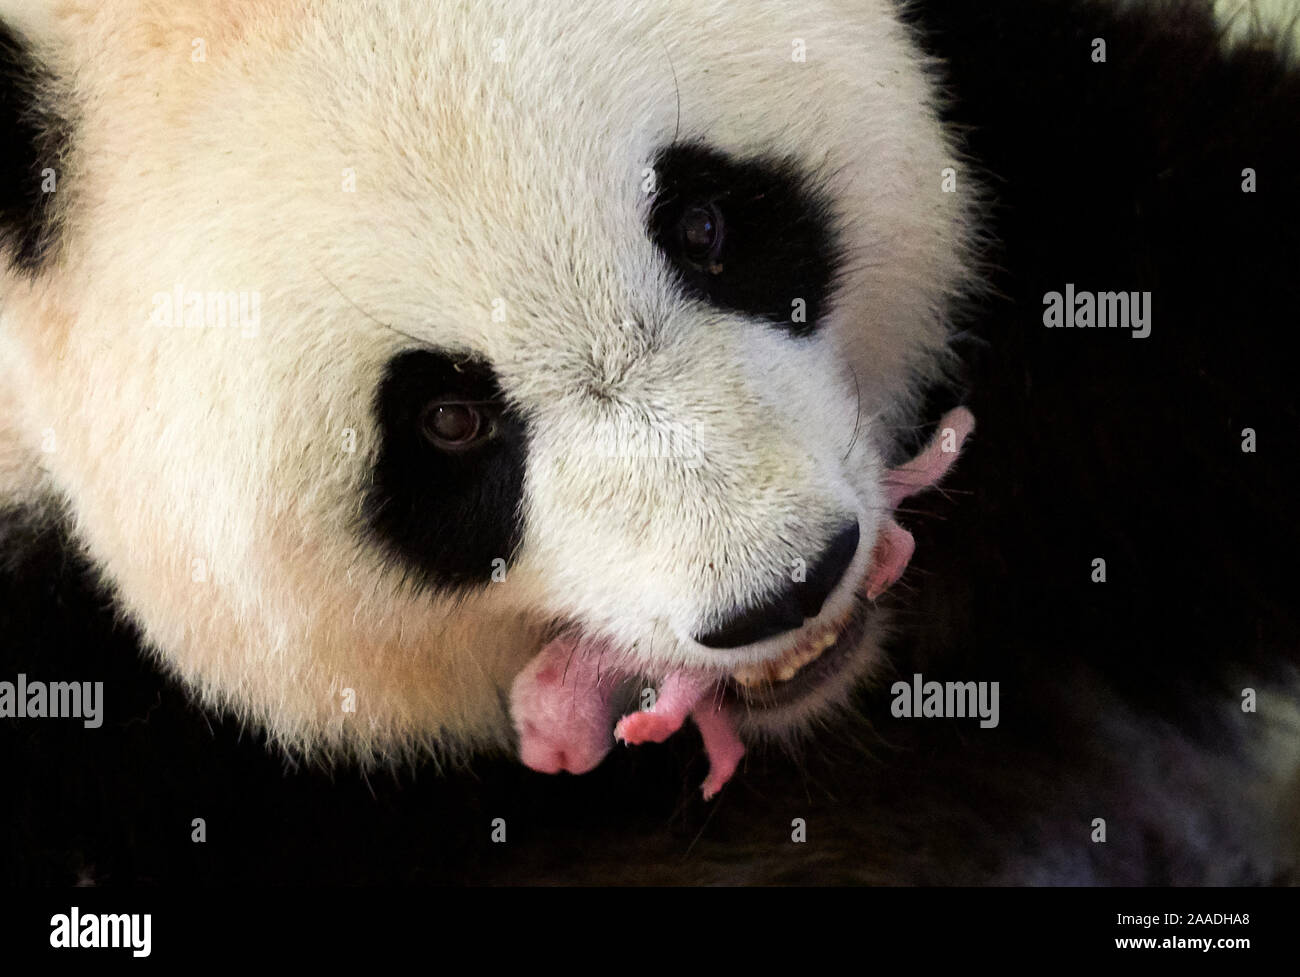 Giant panda (Ailuropoda melanoleuca) female, Huan Huan, holding her newborn baby in mouth, 3 and a half  days old, Beauval Zoo, France. 8th August 2017 Stock Photo